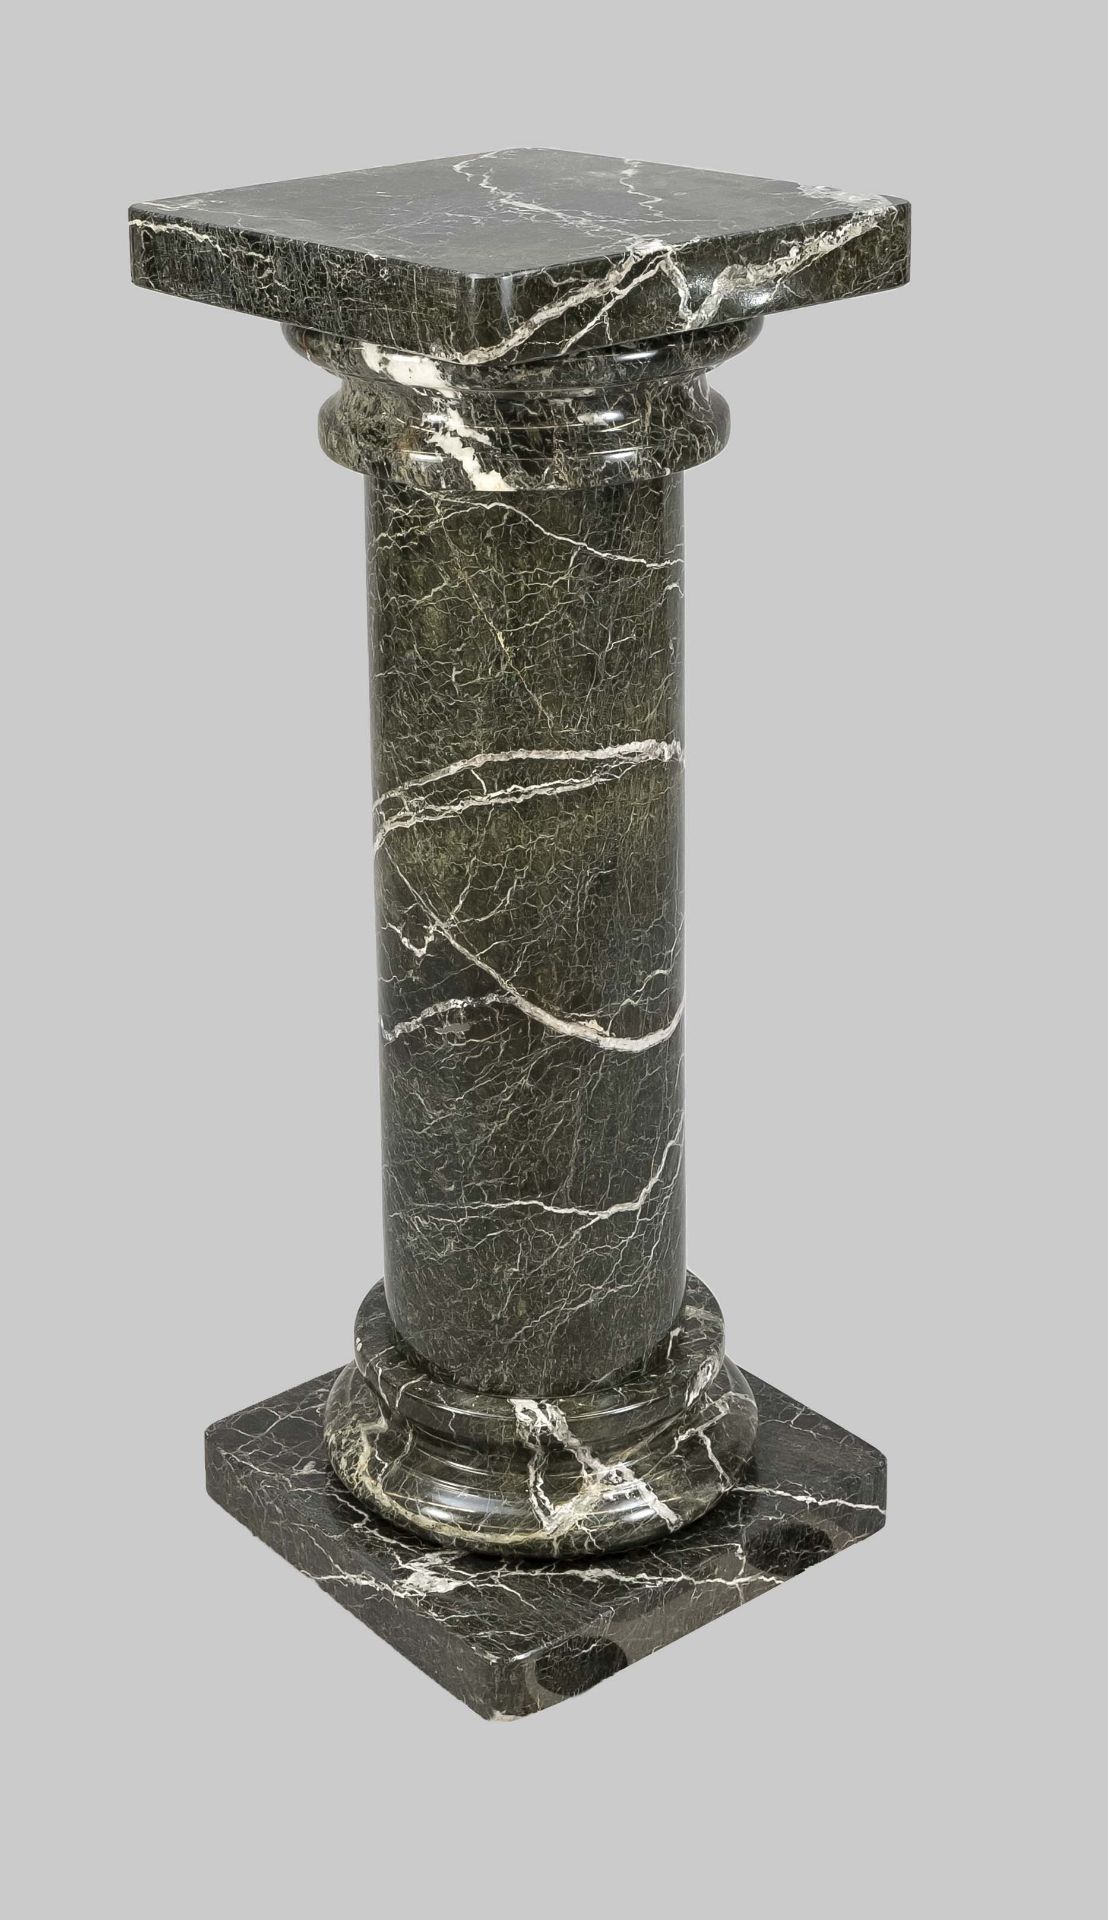 Heavy floral column/palm pedestal, 20th c., polished black-green white veined marble. Simple form,